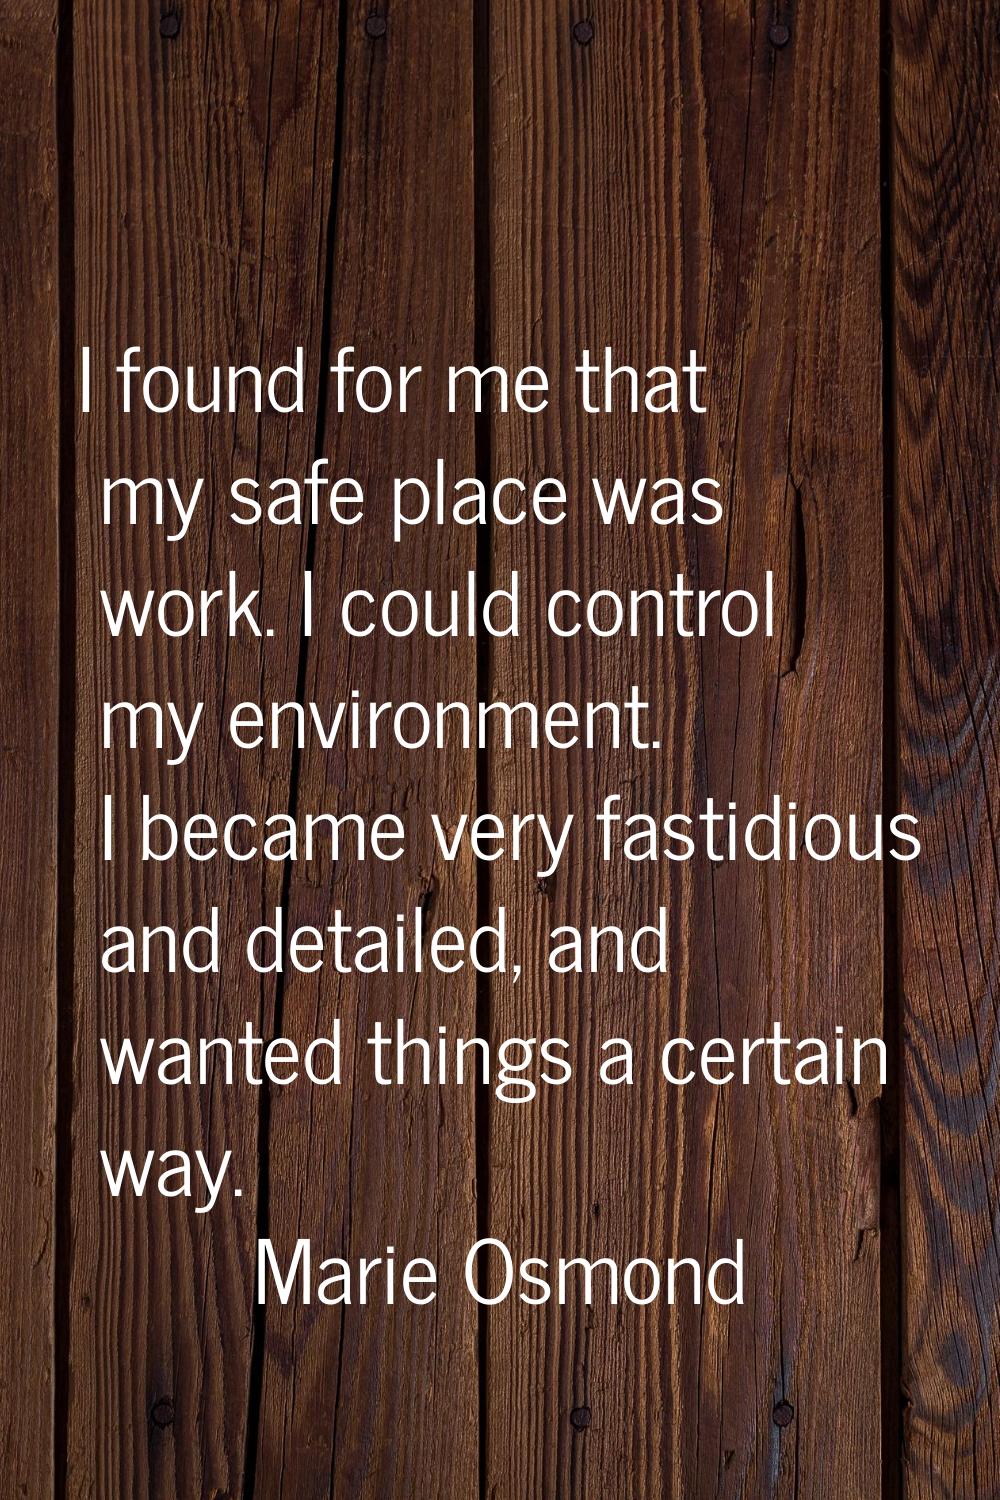 I found for me that my safe place was work. I could control my environment. I became very fastidiou